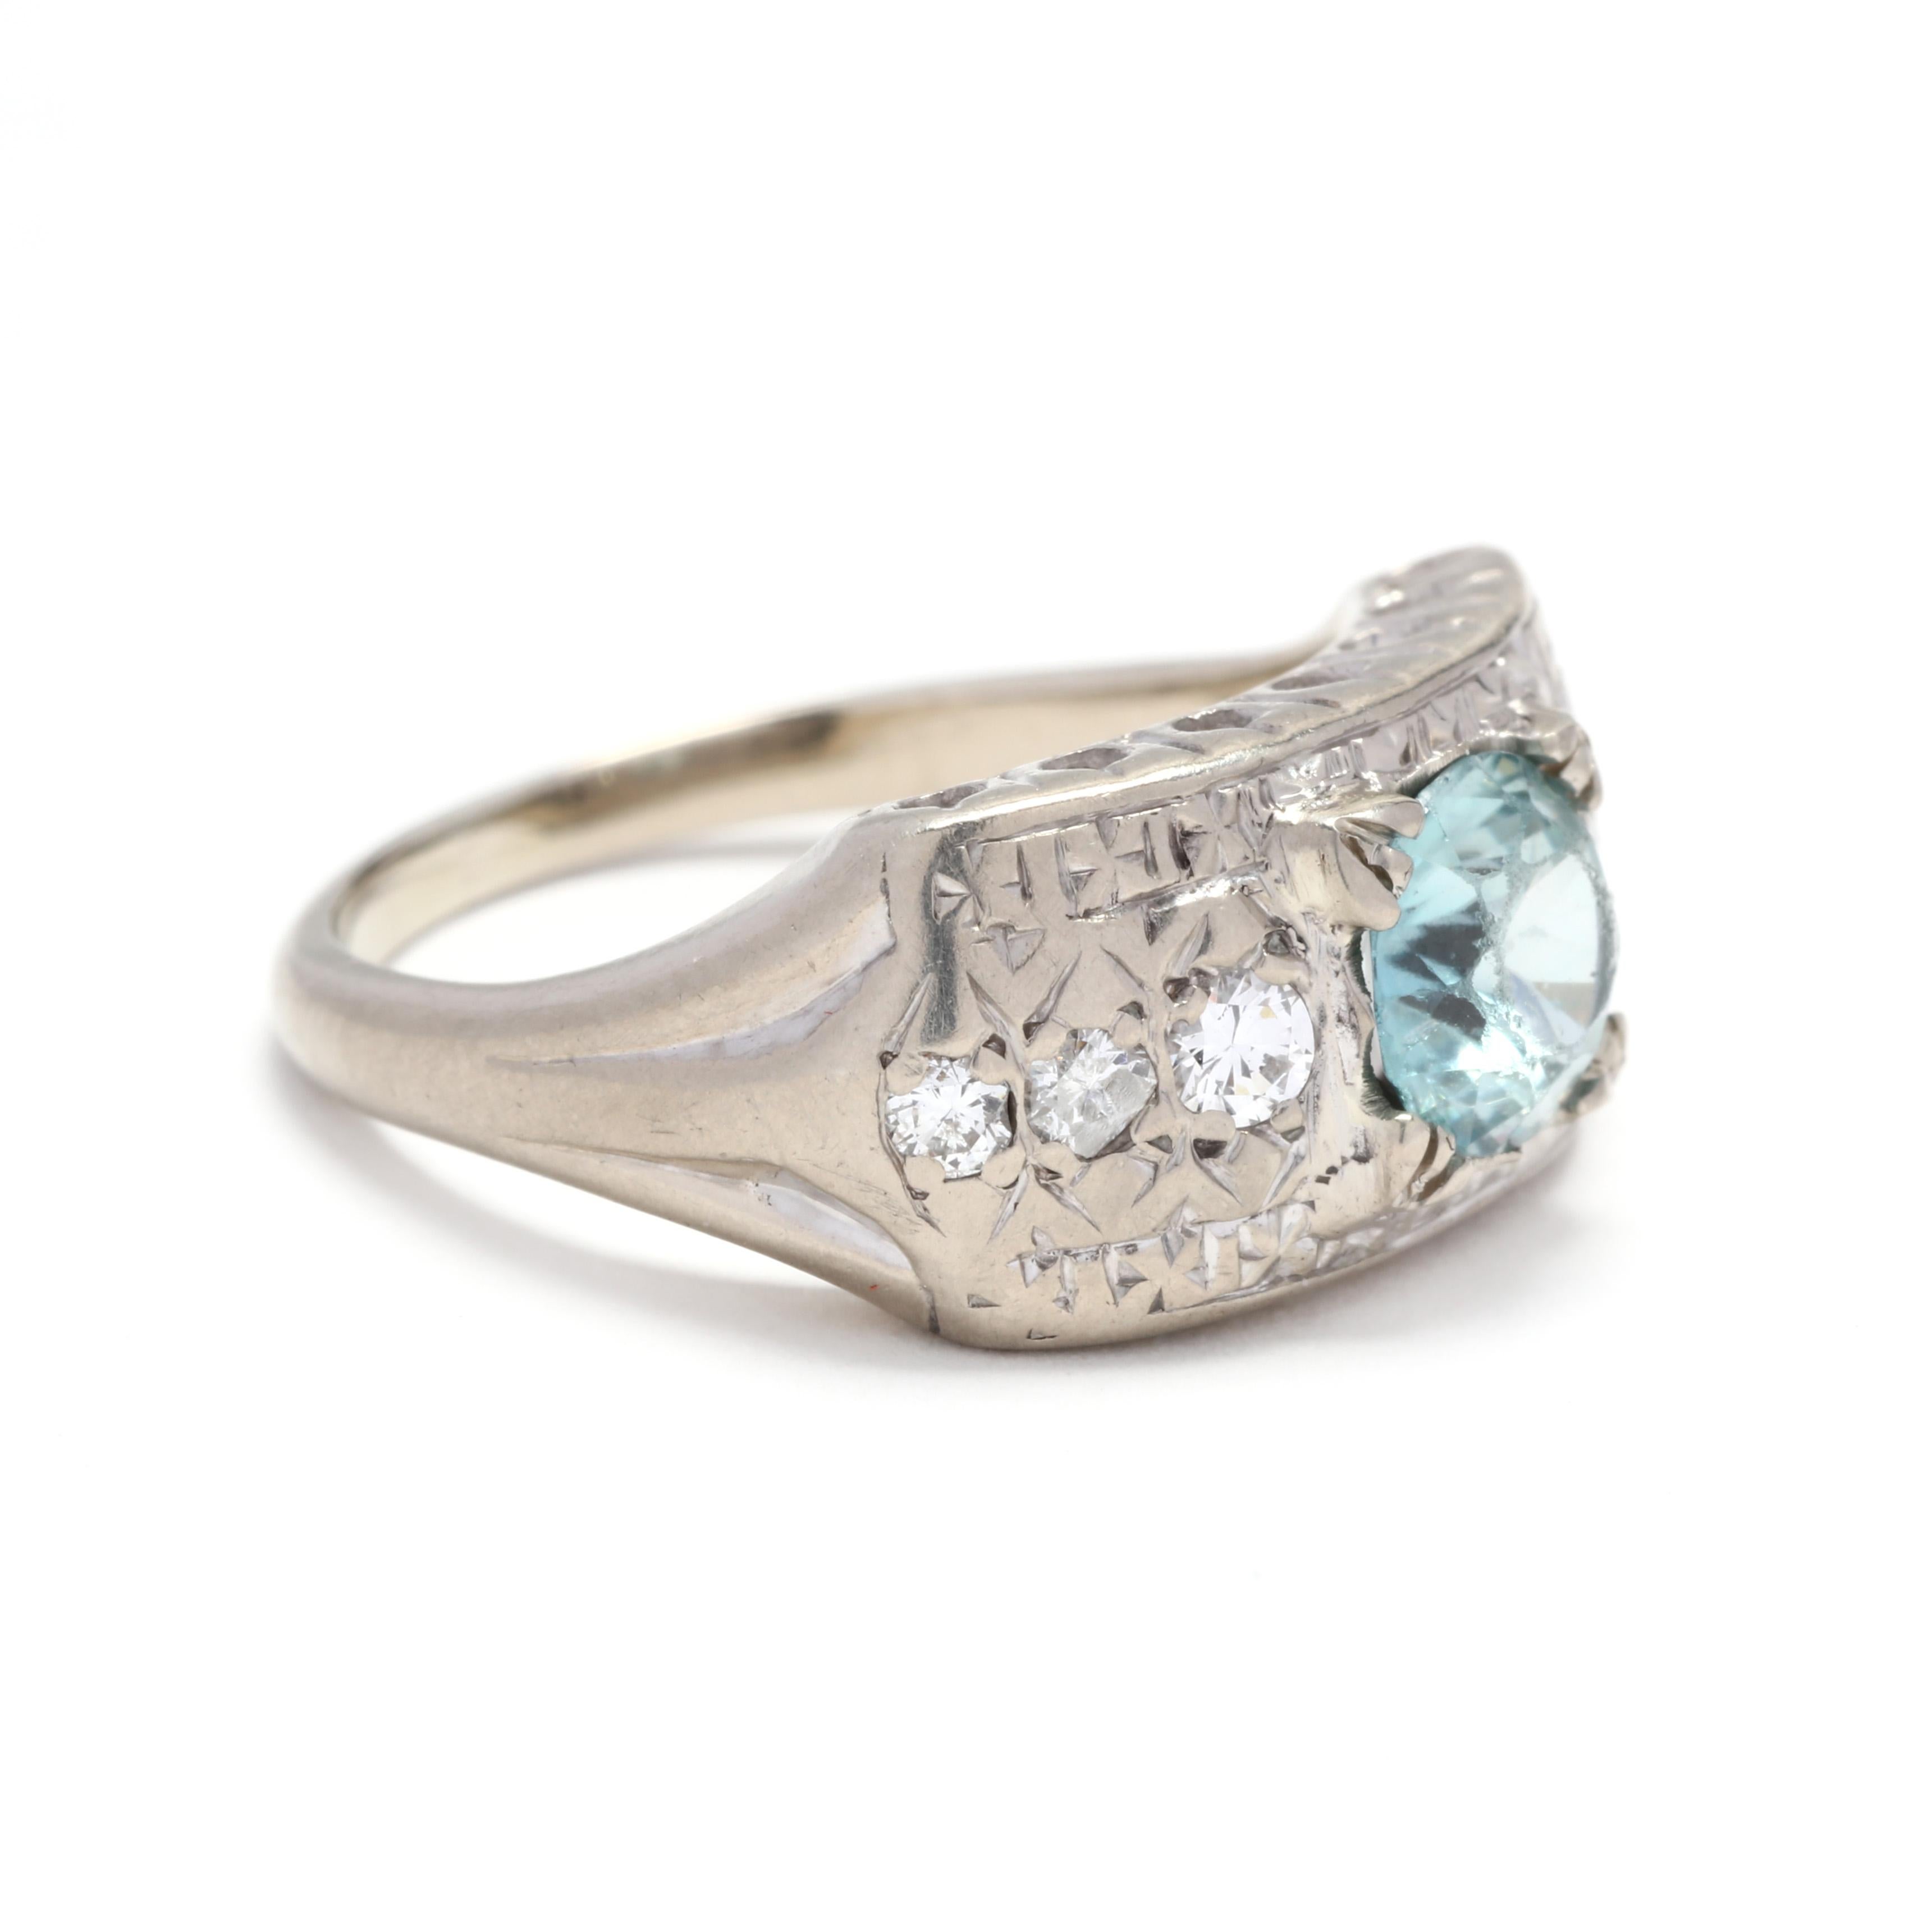 A vintage 14 karat white gold, blue zircon and diamond engagement statement ring. This ring features a round brilliant cut blue zircon weighing approximately 1.20 carats set on a wide band with three round brilliant cut diamonds on either side